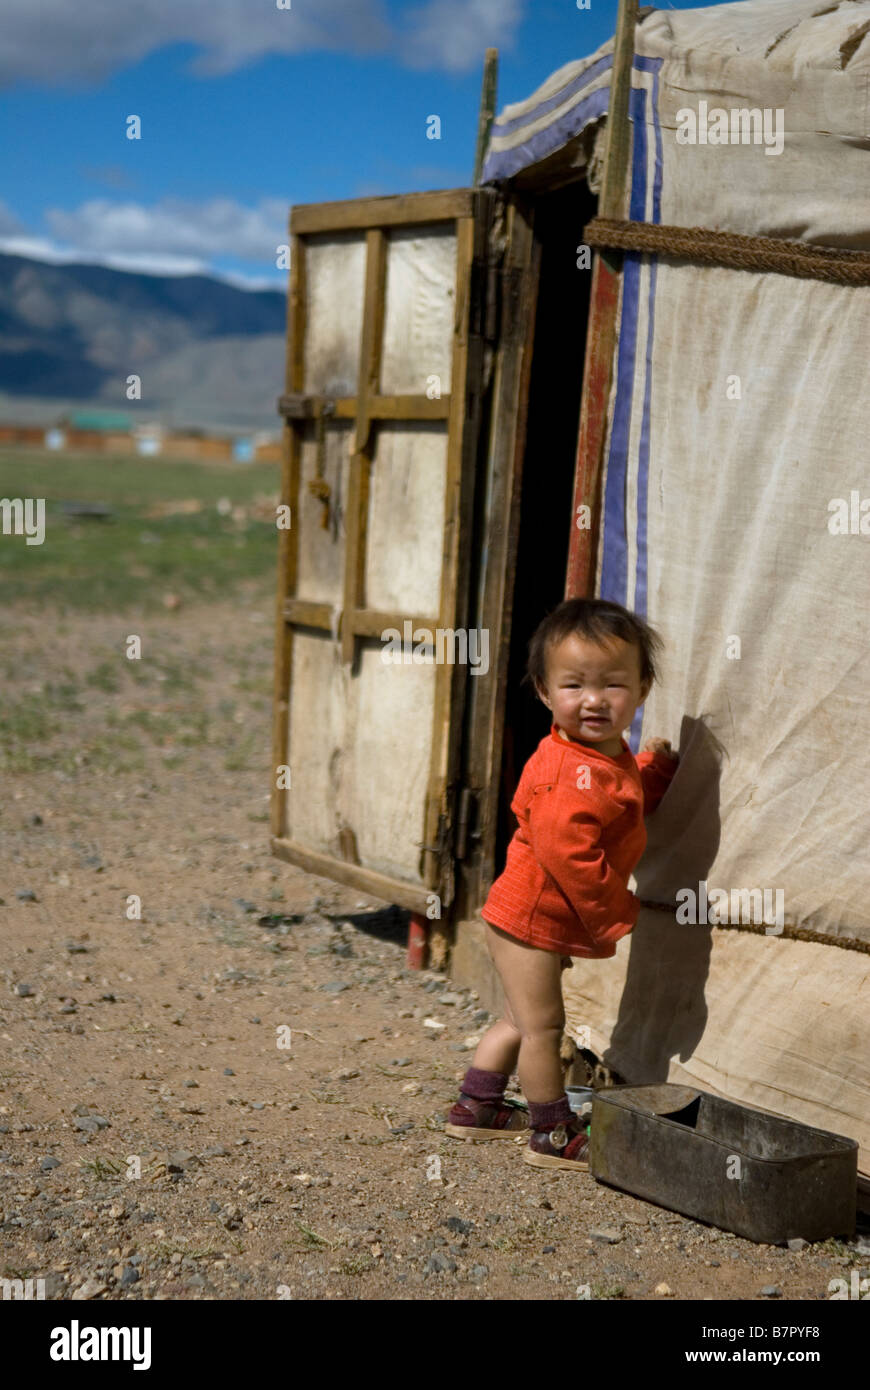 A nomad community camped on the outskirts of a remote village Bogd in the Gobi Desert Mongolia Stock Photo